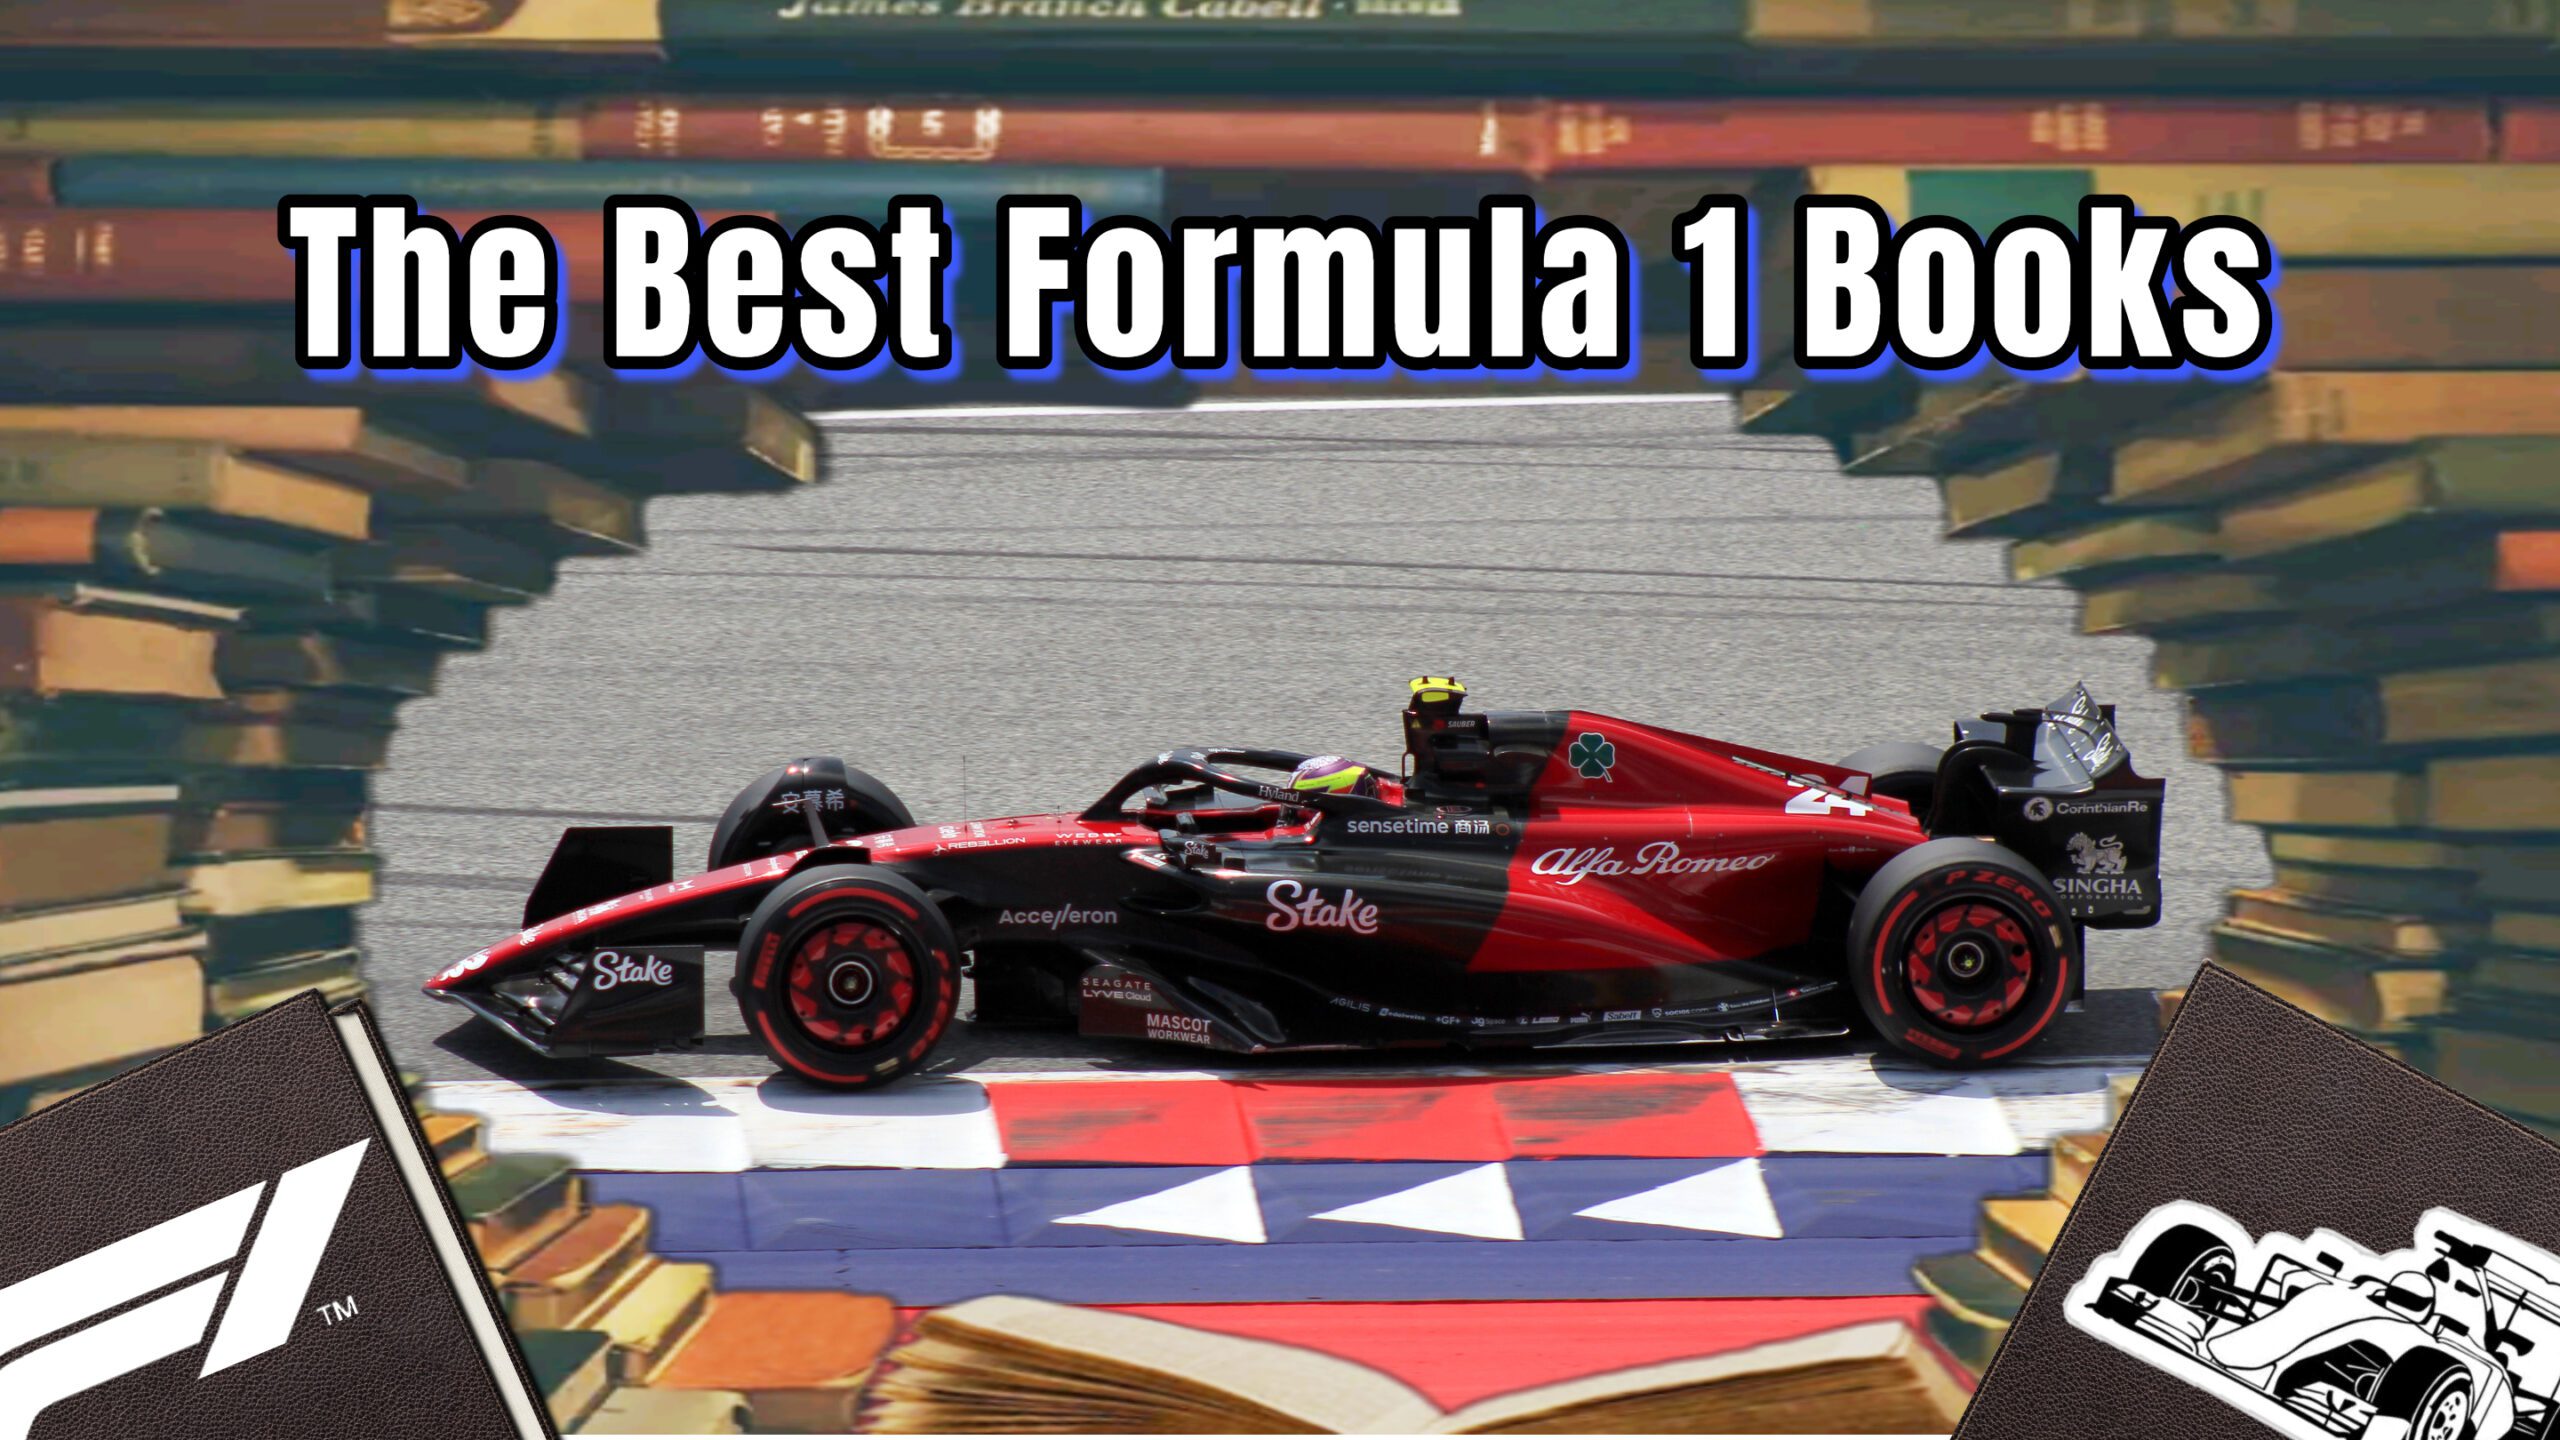 The best racing books for Formula 1 nerds